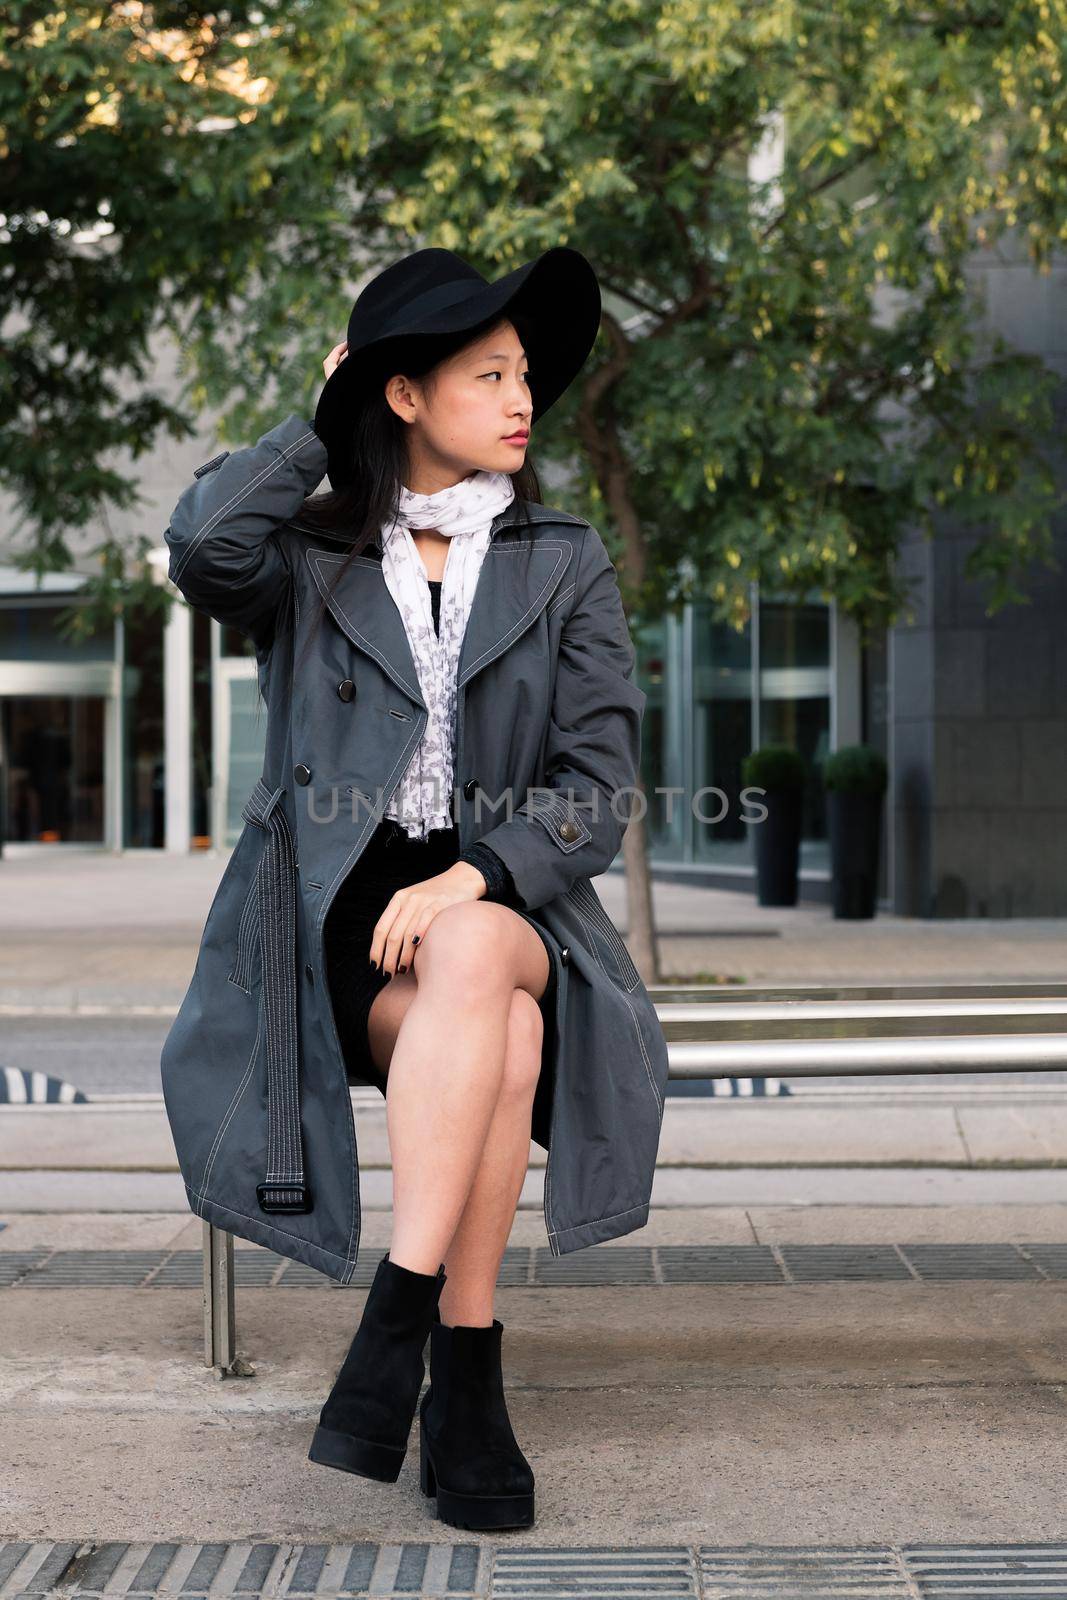 elegant asian woman sitting waiting for the bus by raulmelldo